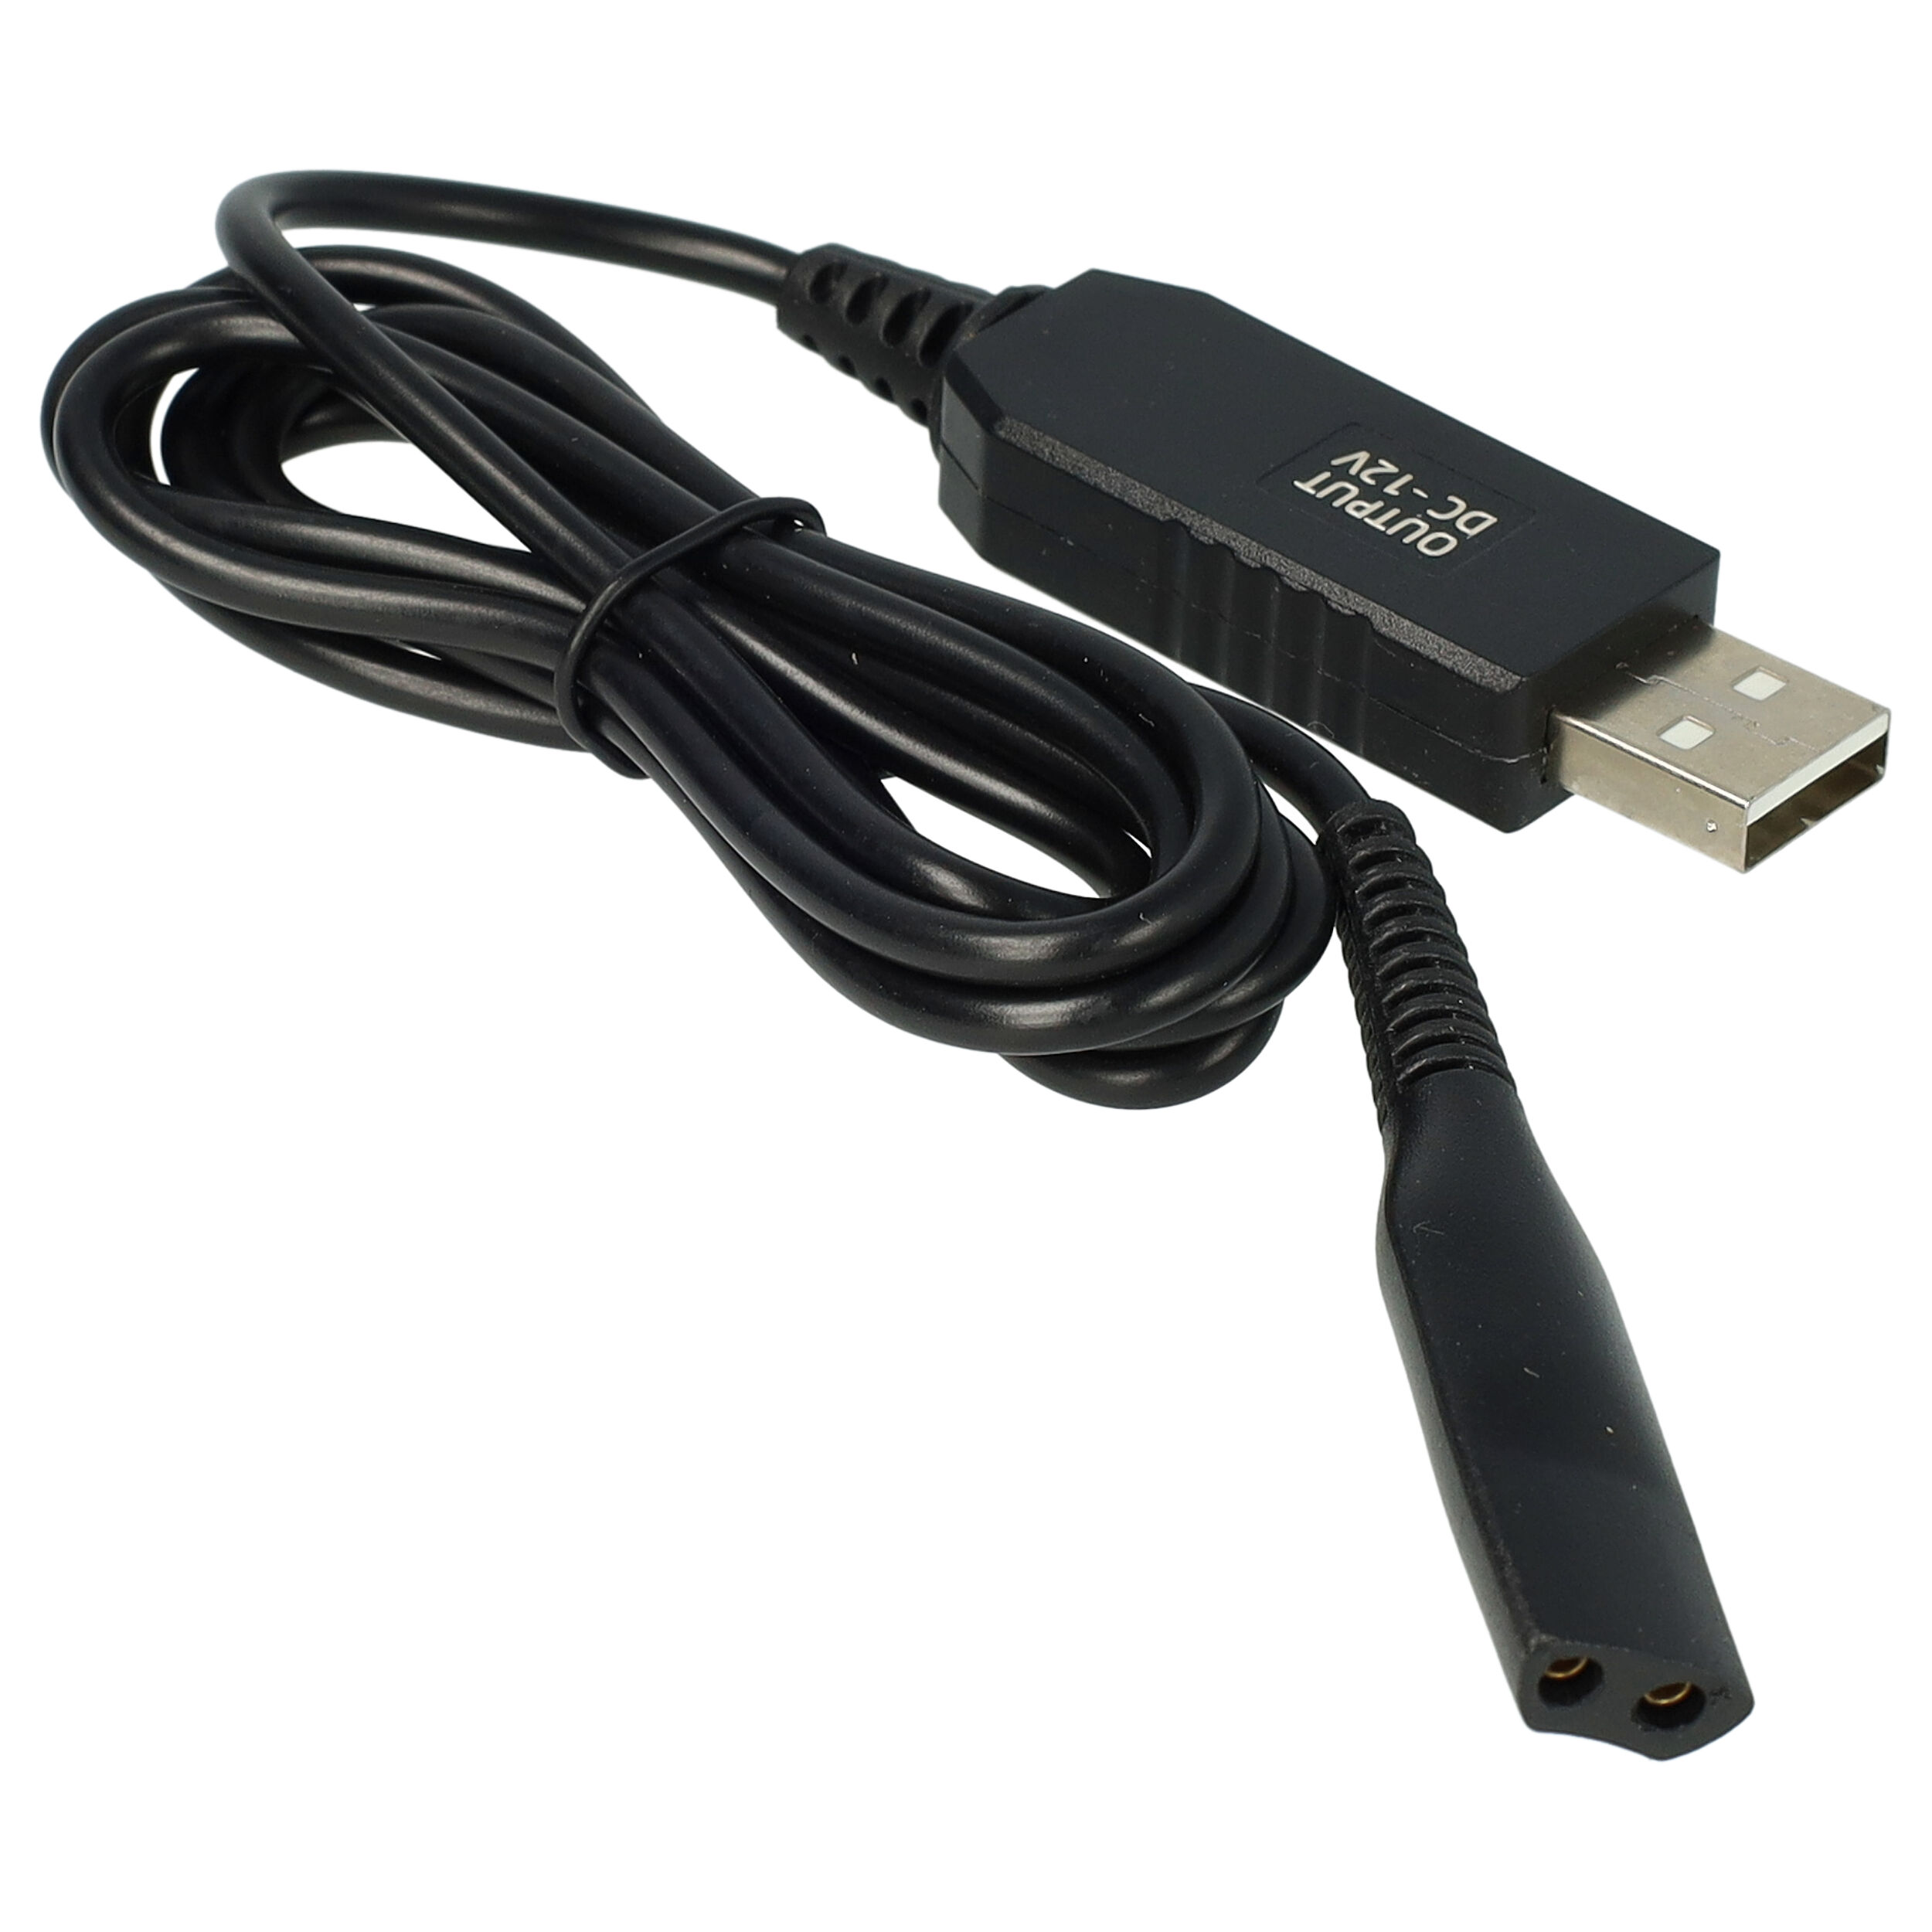 USB charging cable for Oral-B Genius i 8000, i 9000, Type 3765